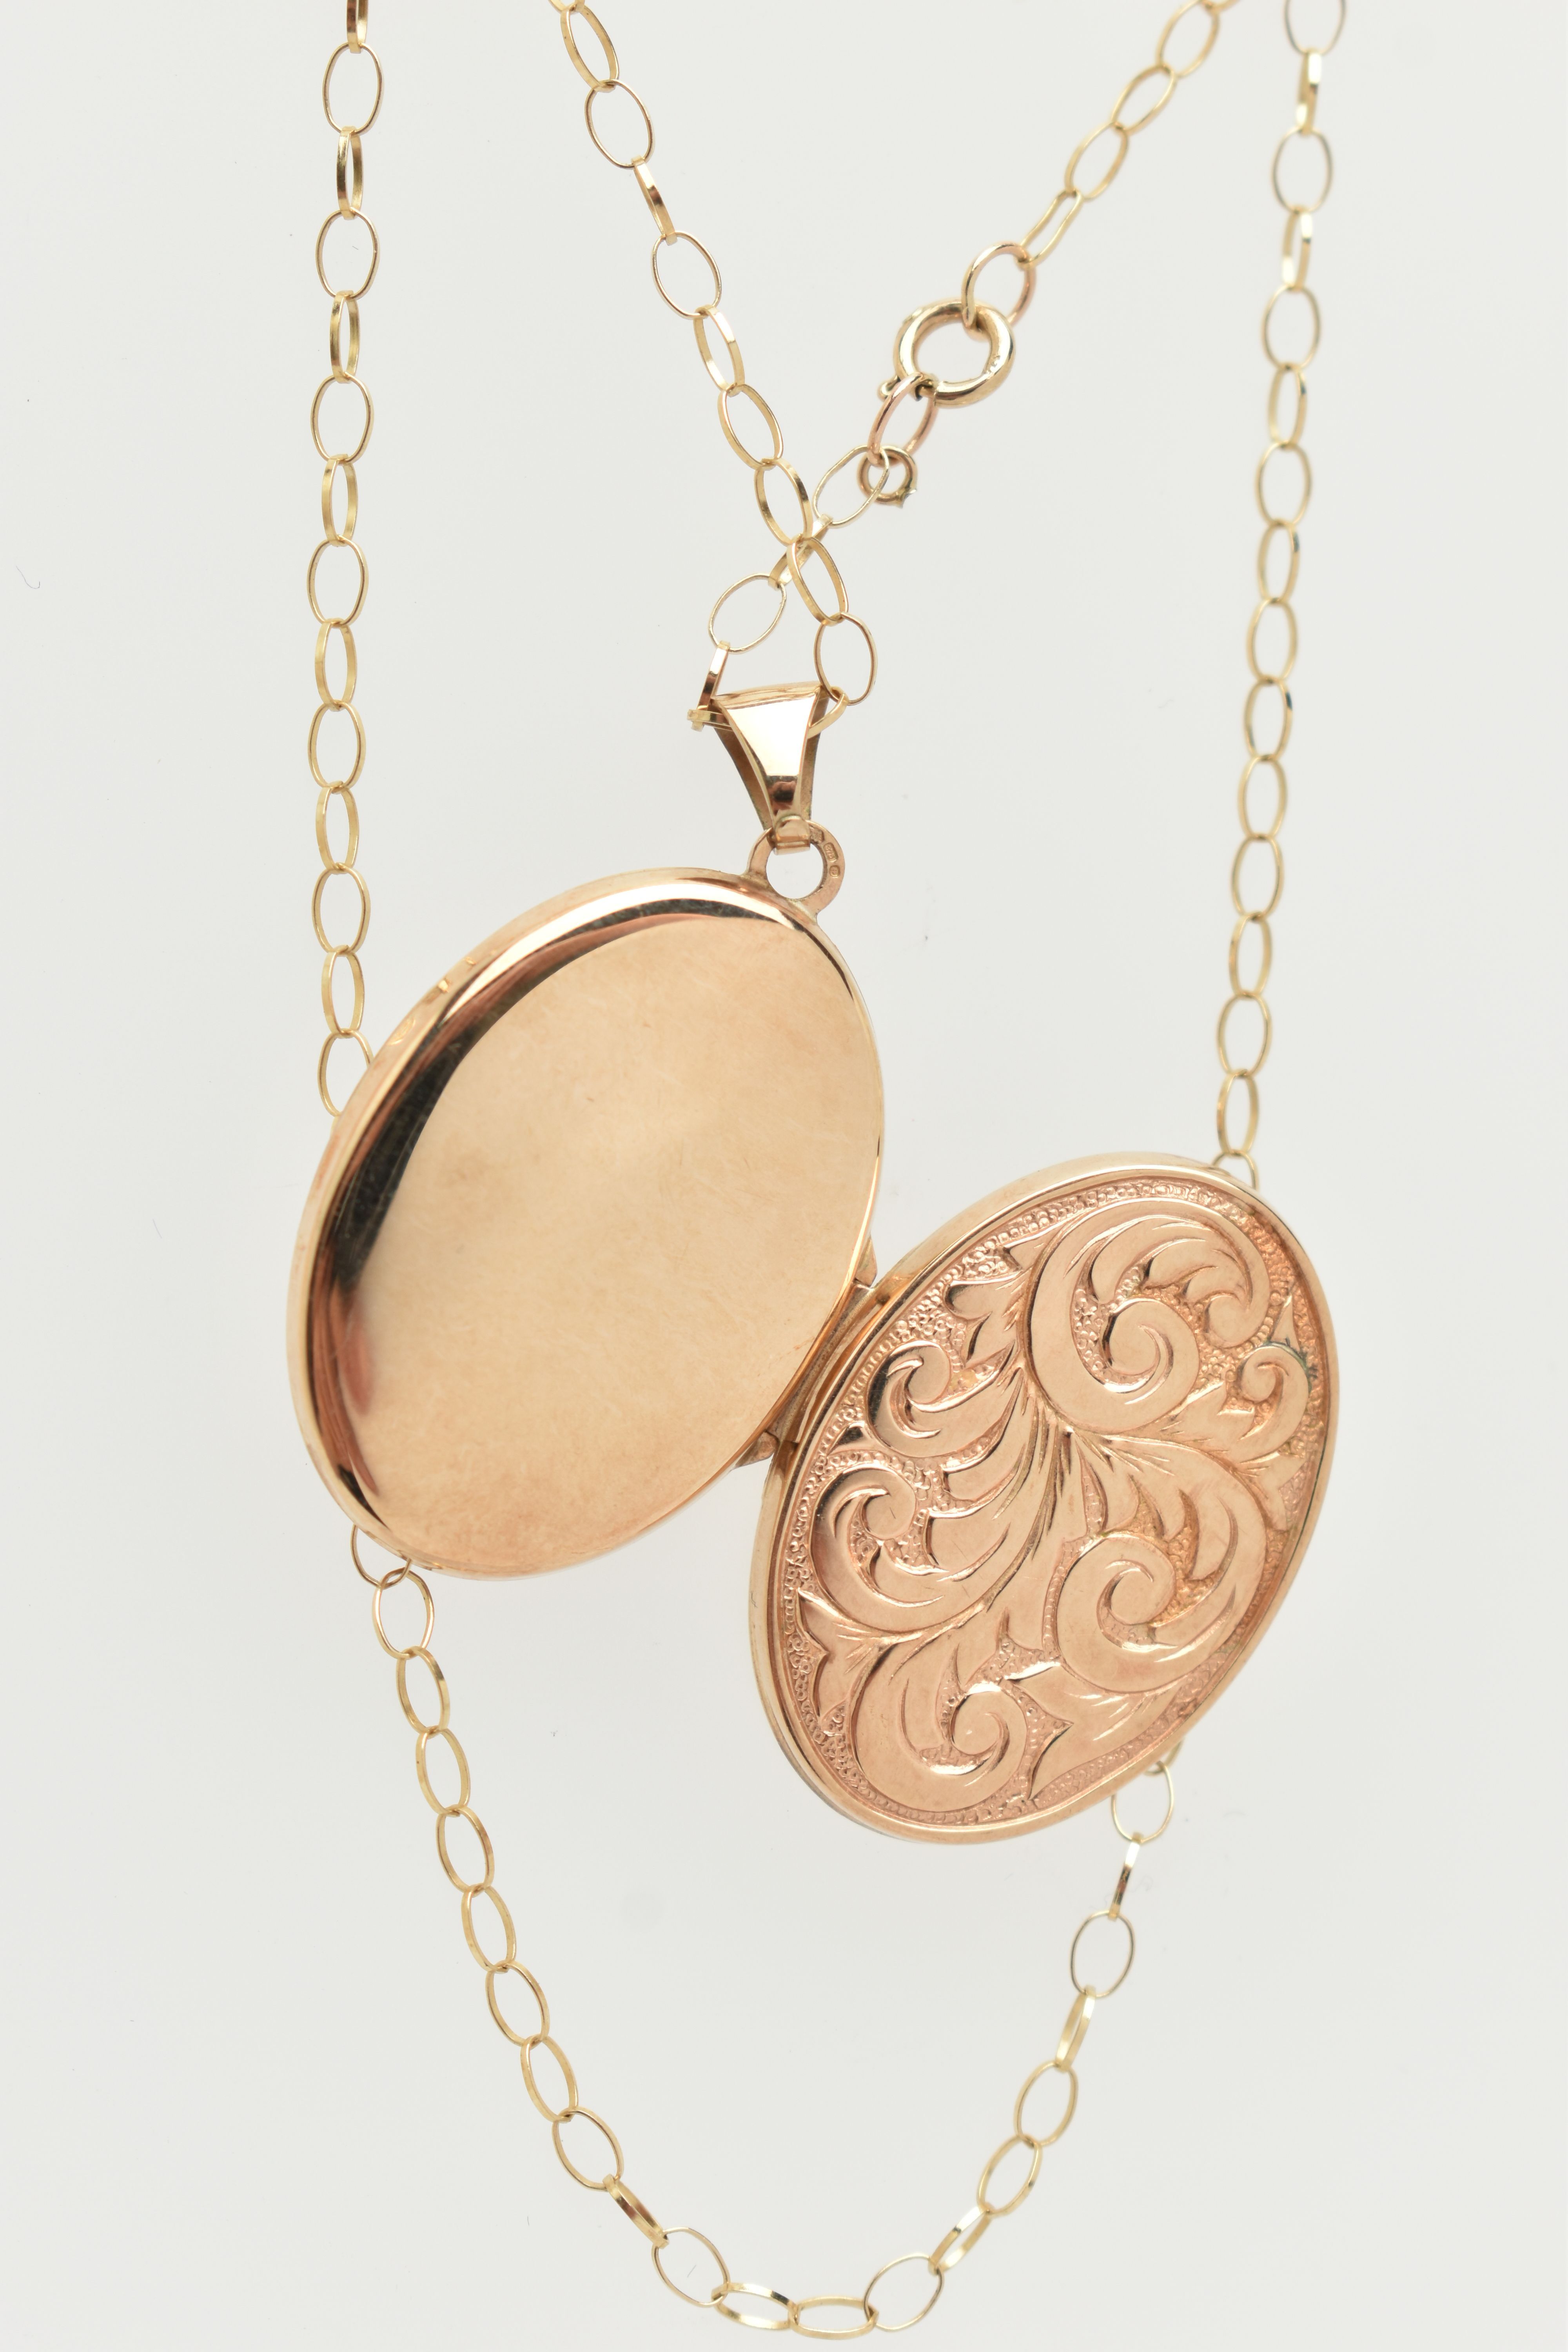 A 9CT GOLD LOCKET PENDANT AND CHAIN, oval floral pattern locket, opens to reveal two vacant - Image 2 of 3